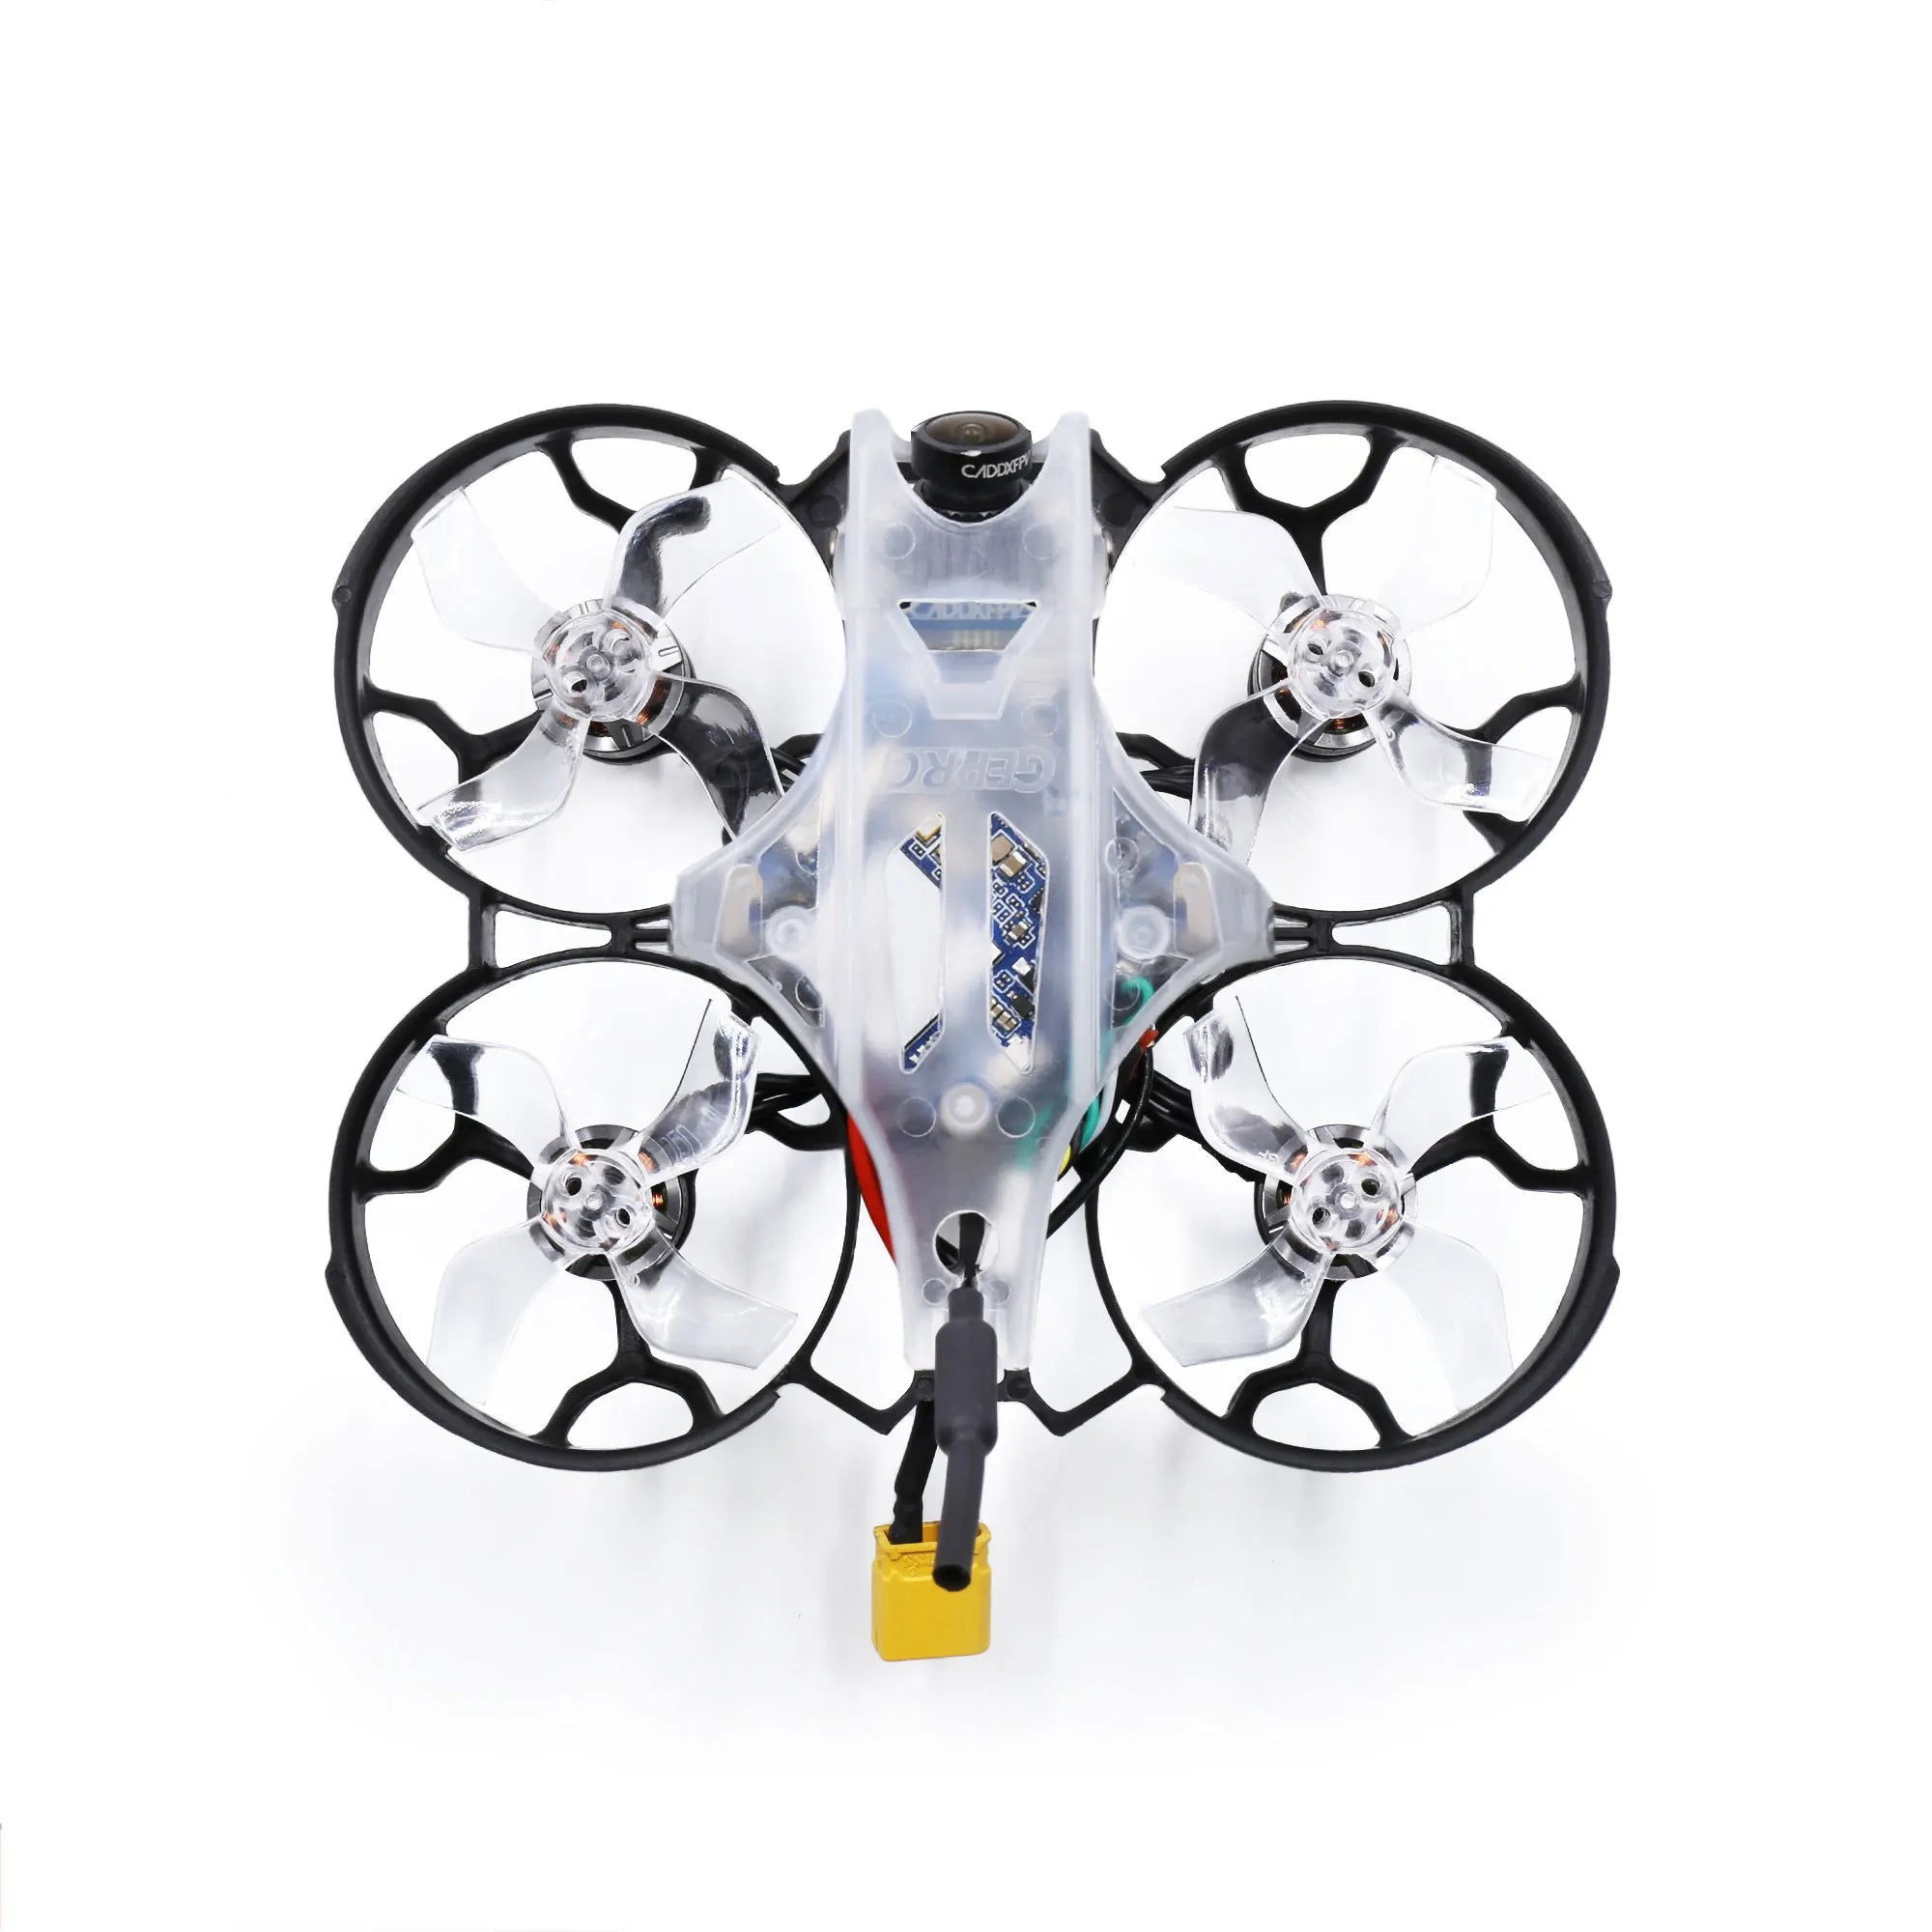 GEPRC Thinking P16 FPV Drone, Build-in Caddx Loris 4K 60fps Whoop style frame